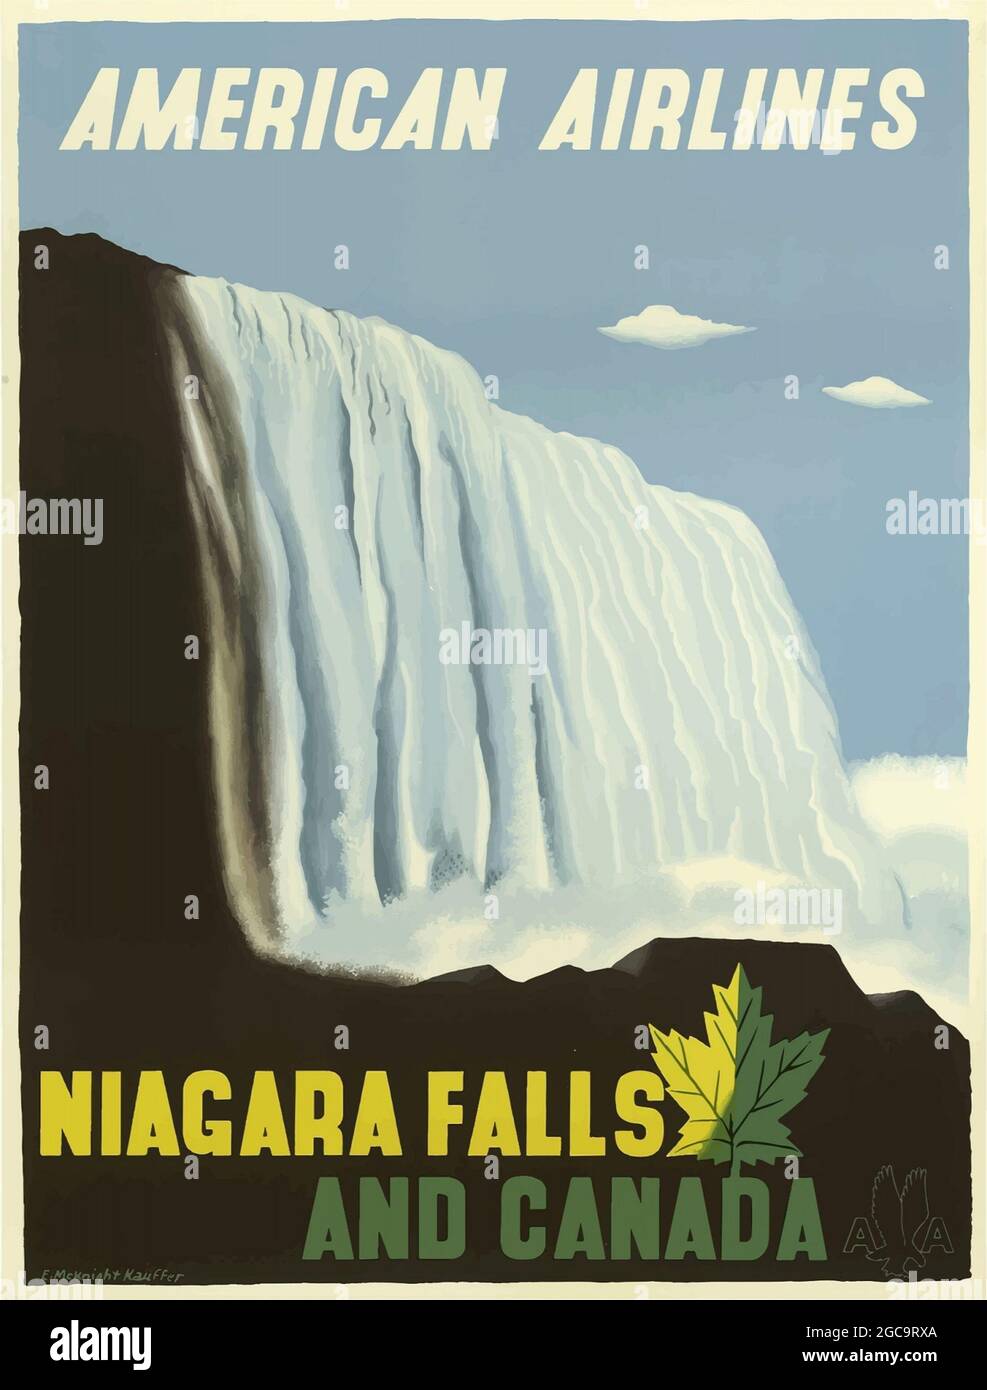 An vintage travel poster for Niagara Falls and Canada with American Airlines Stock Photo